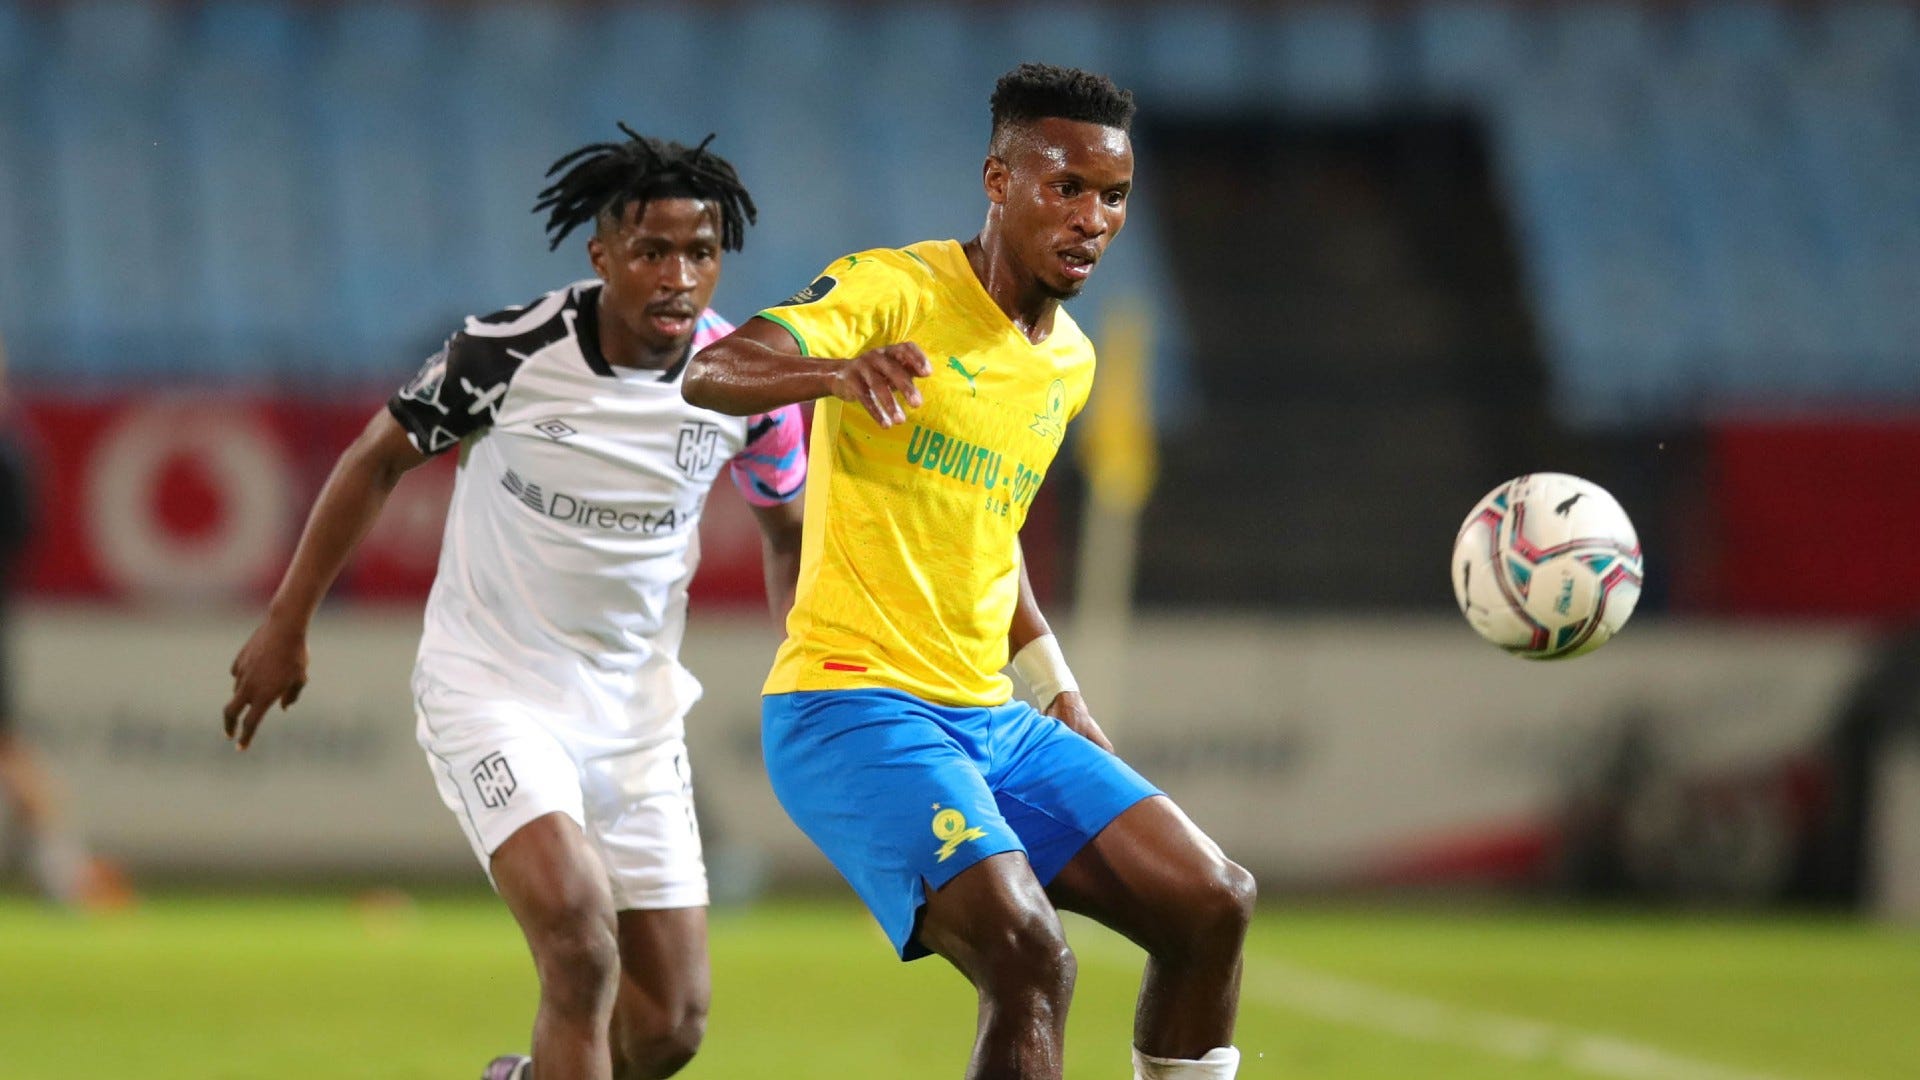 Themba Zwane of Mamelodi Sundowns challenged by Terrence Mashego of Cape Town City, April 2022